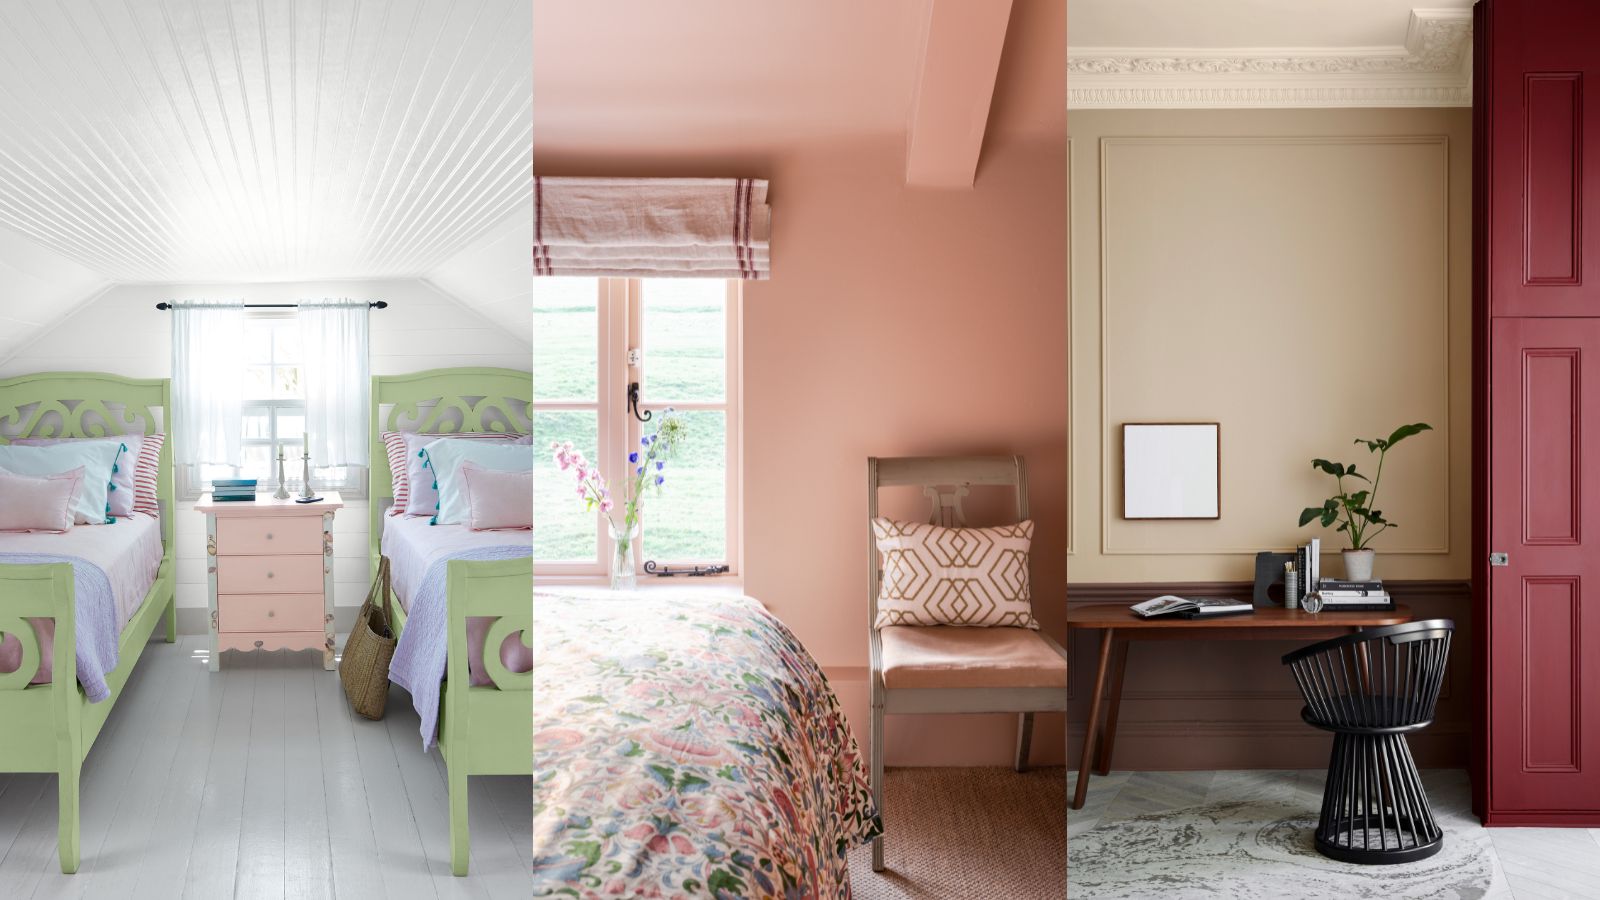 What Colors Make A Small Room Look Bigger? |